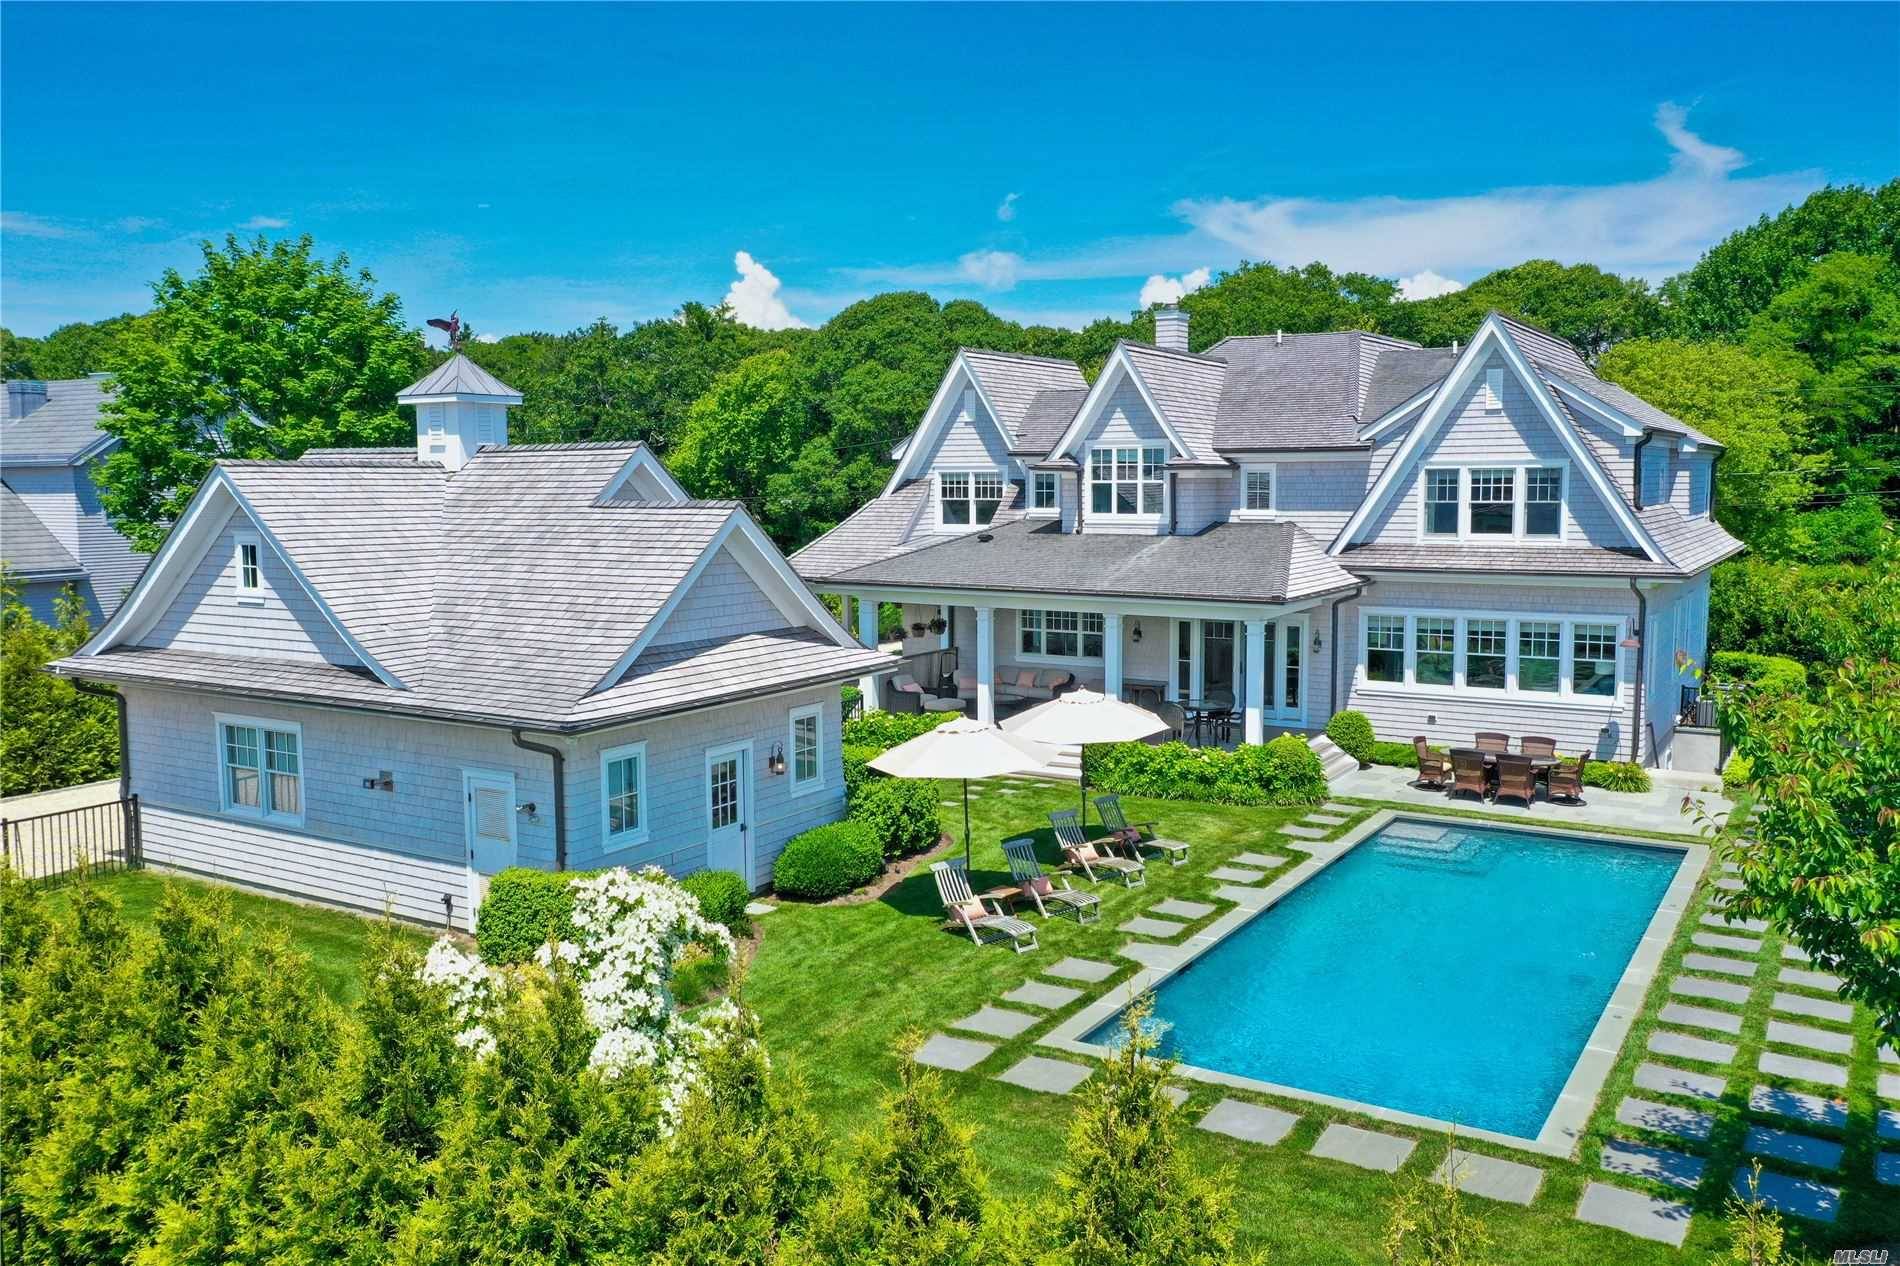 Now Listed, this Quogue South stunning post modern, features a sleek modern yet beachy interior.